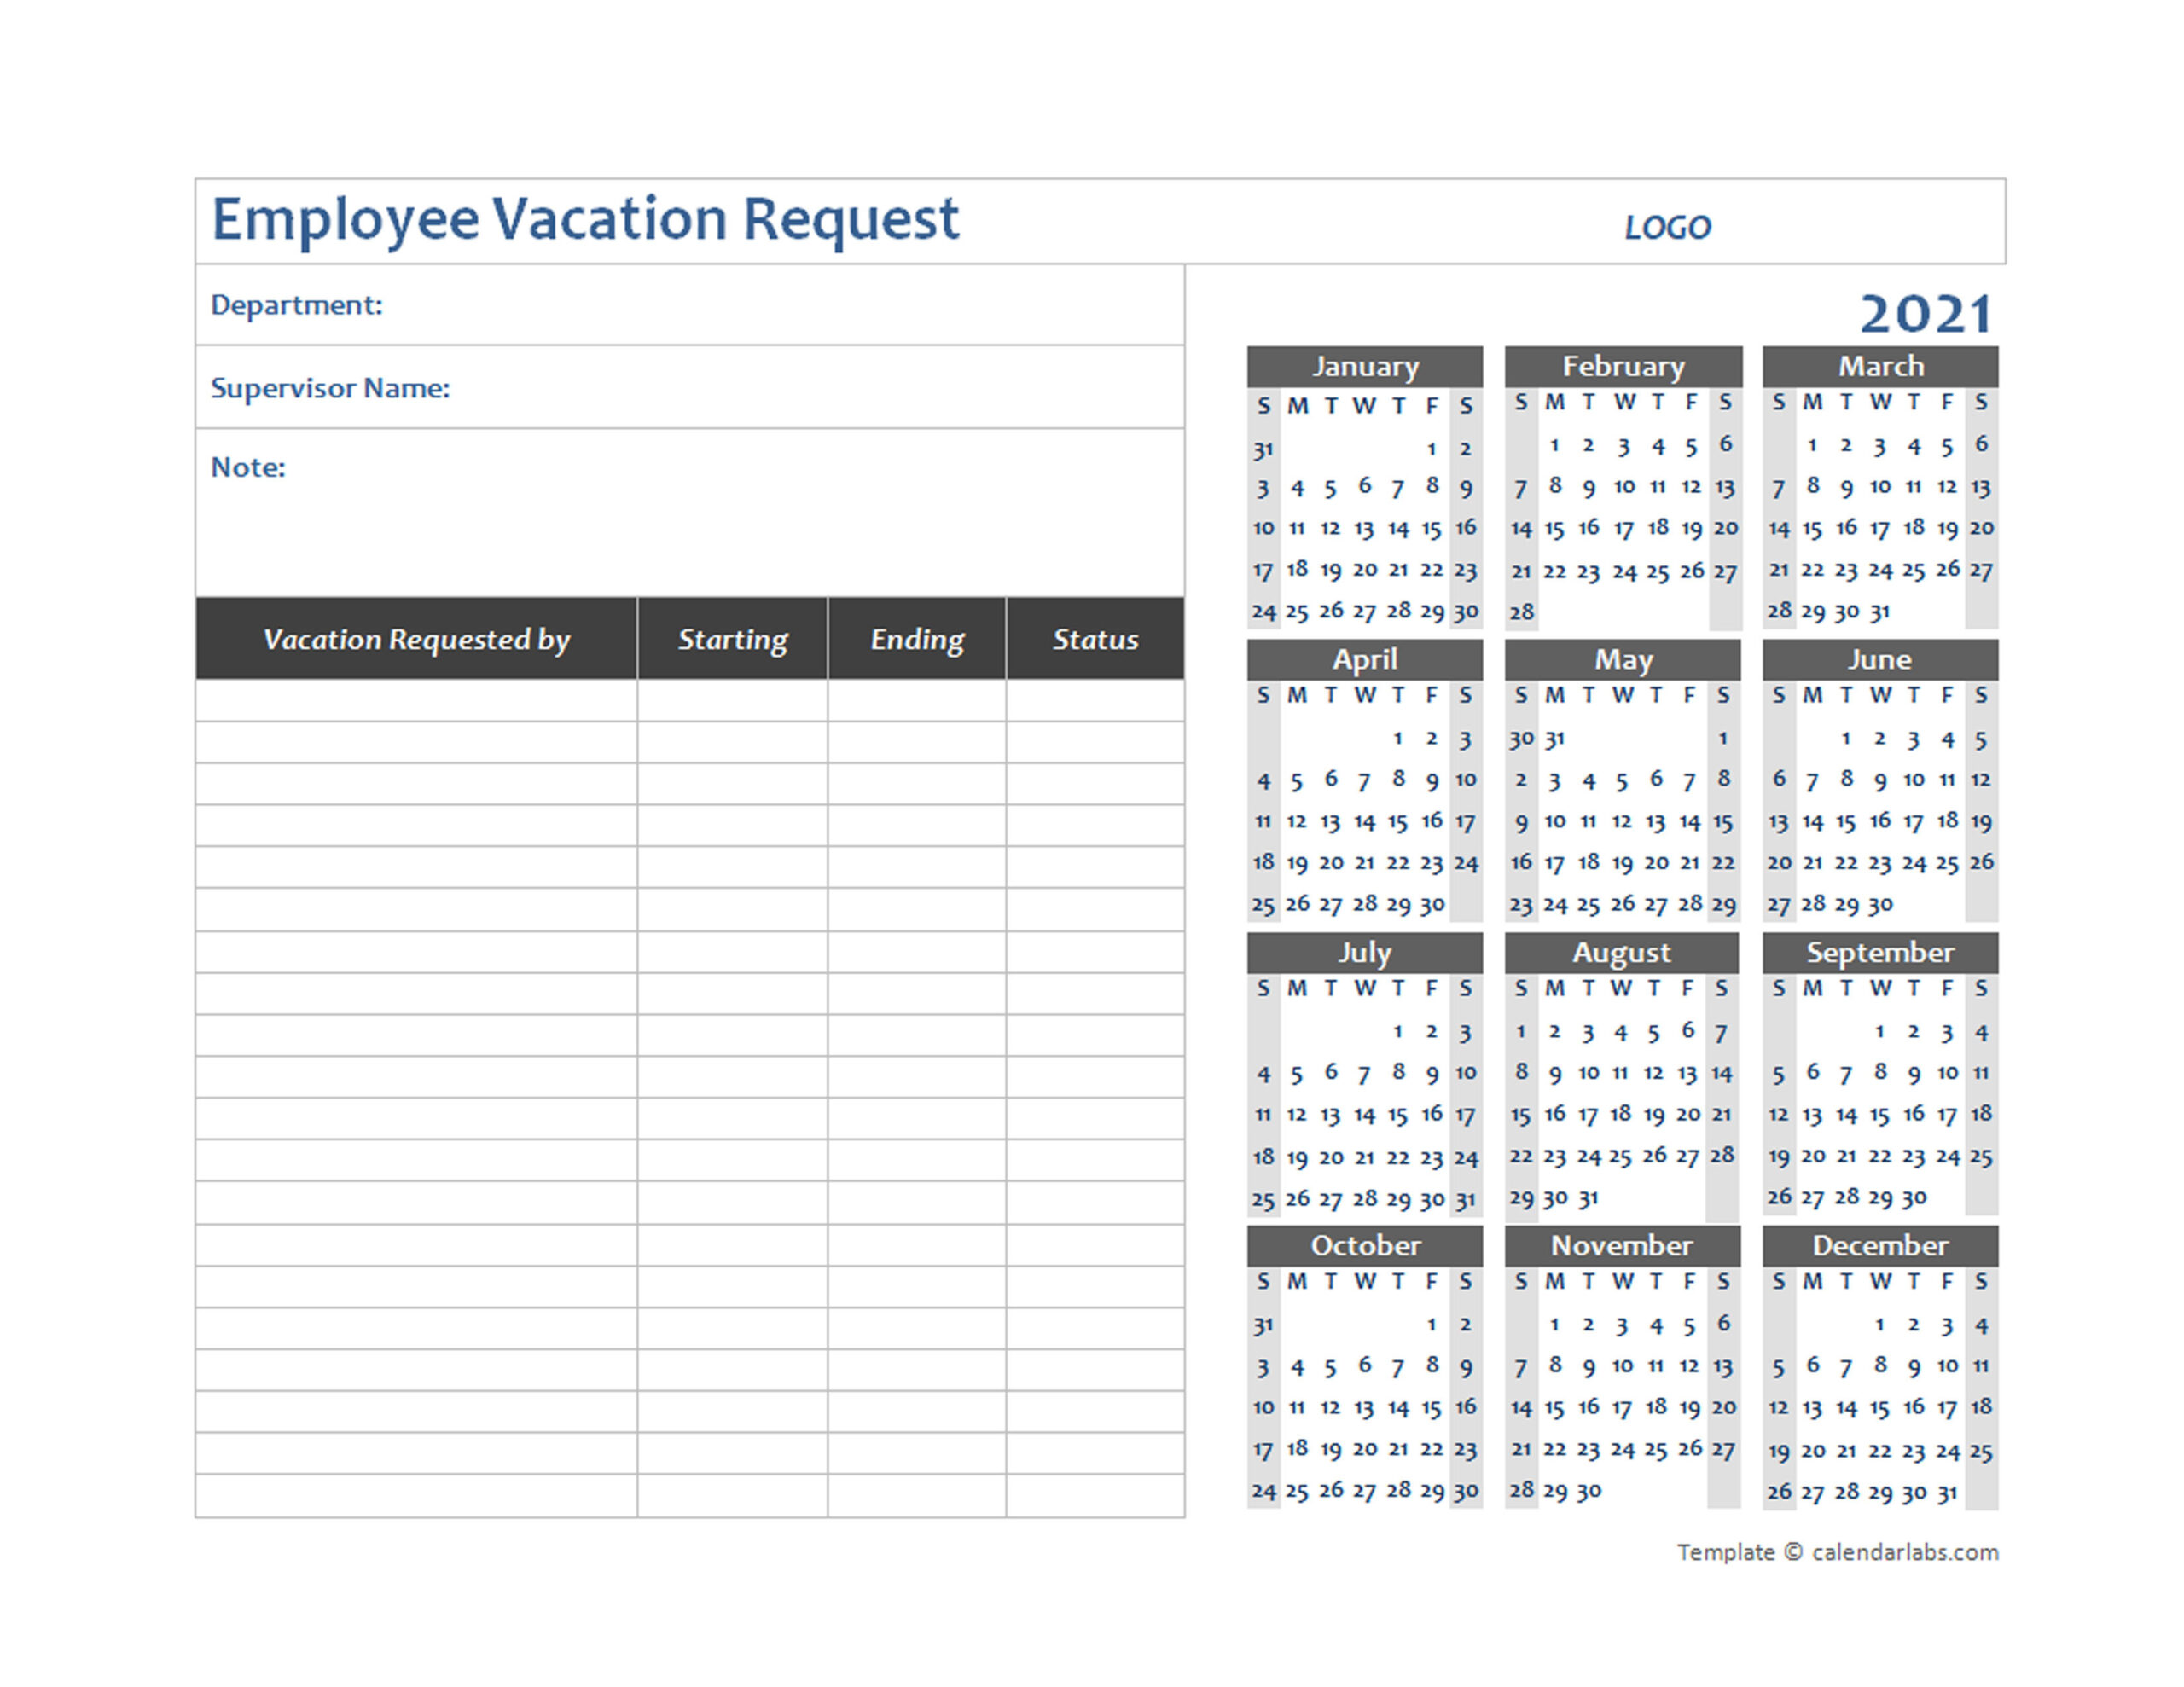 2021 Business Employee Vacation Request - Free Printable-Employee Vacation Calendar Excel 2021